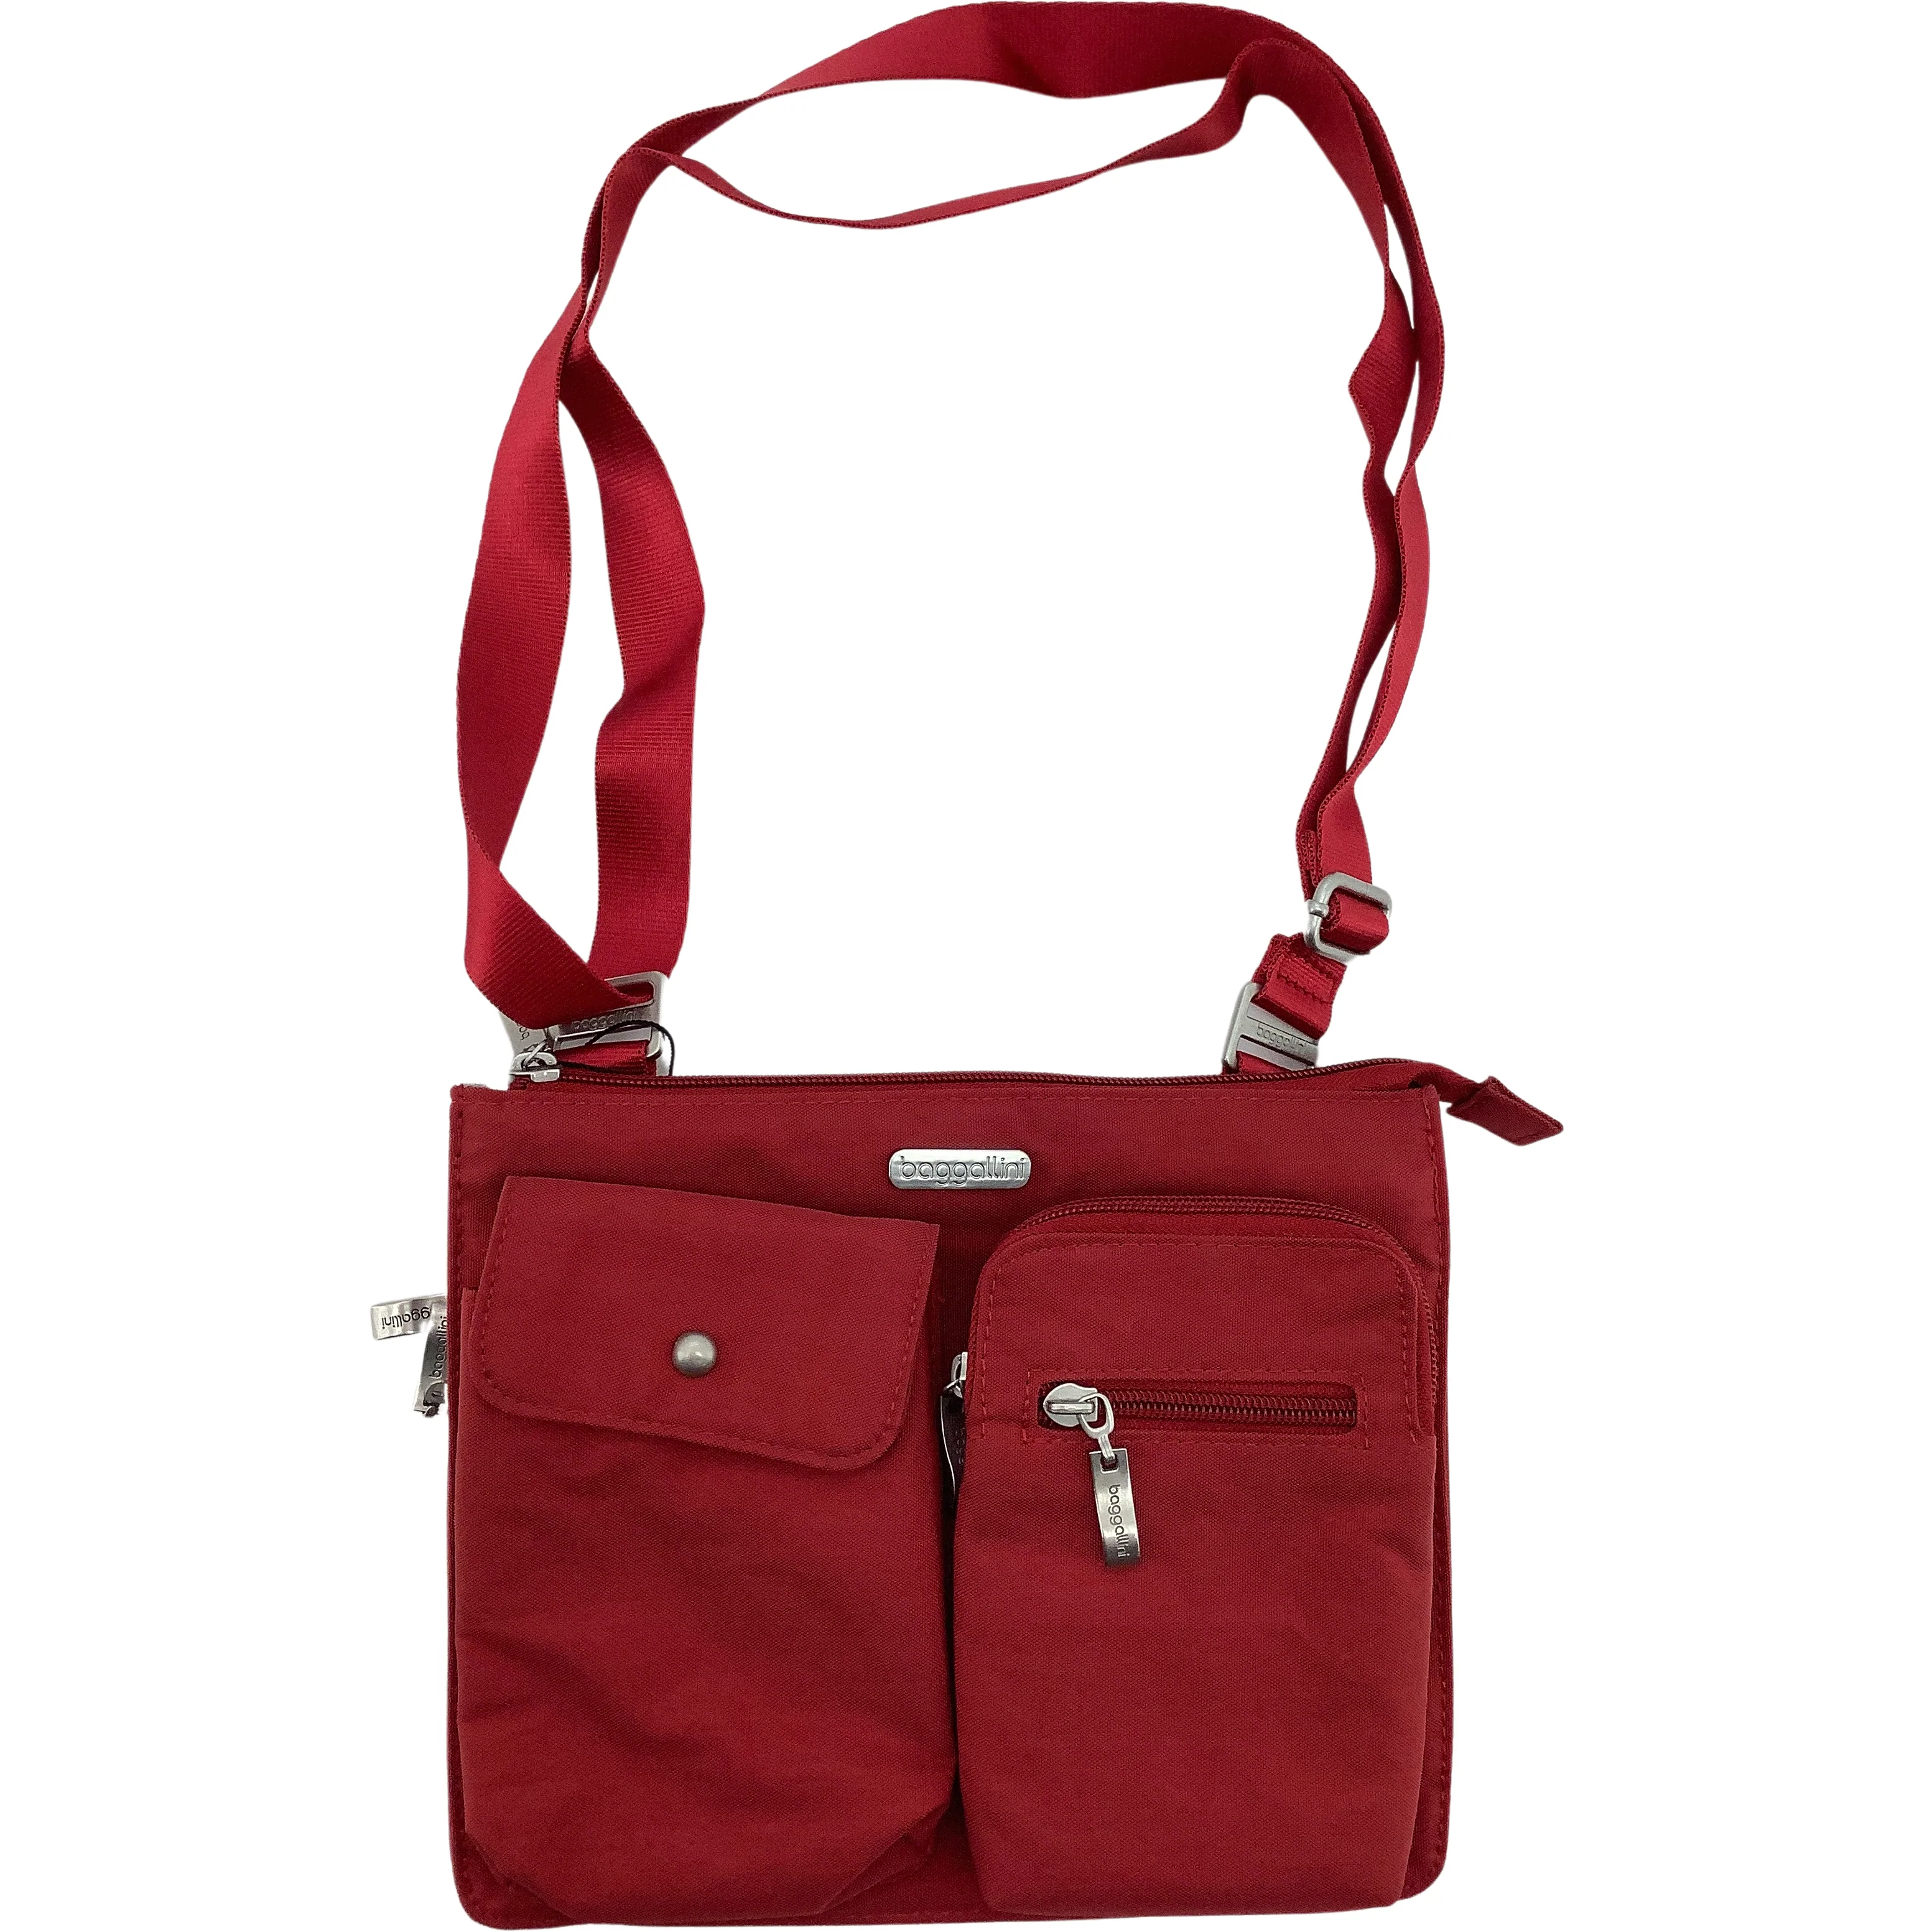 Baggallini Everything Cross Body Travel Bag Set / 2 Piece Set / Red / RFID Protected / Travel Accessories